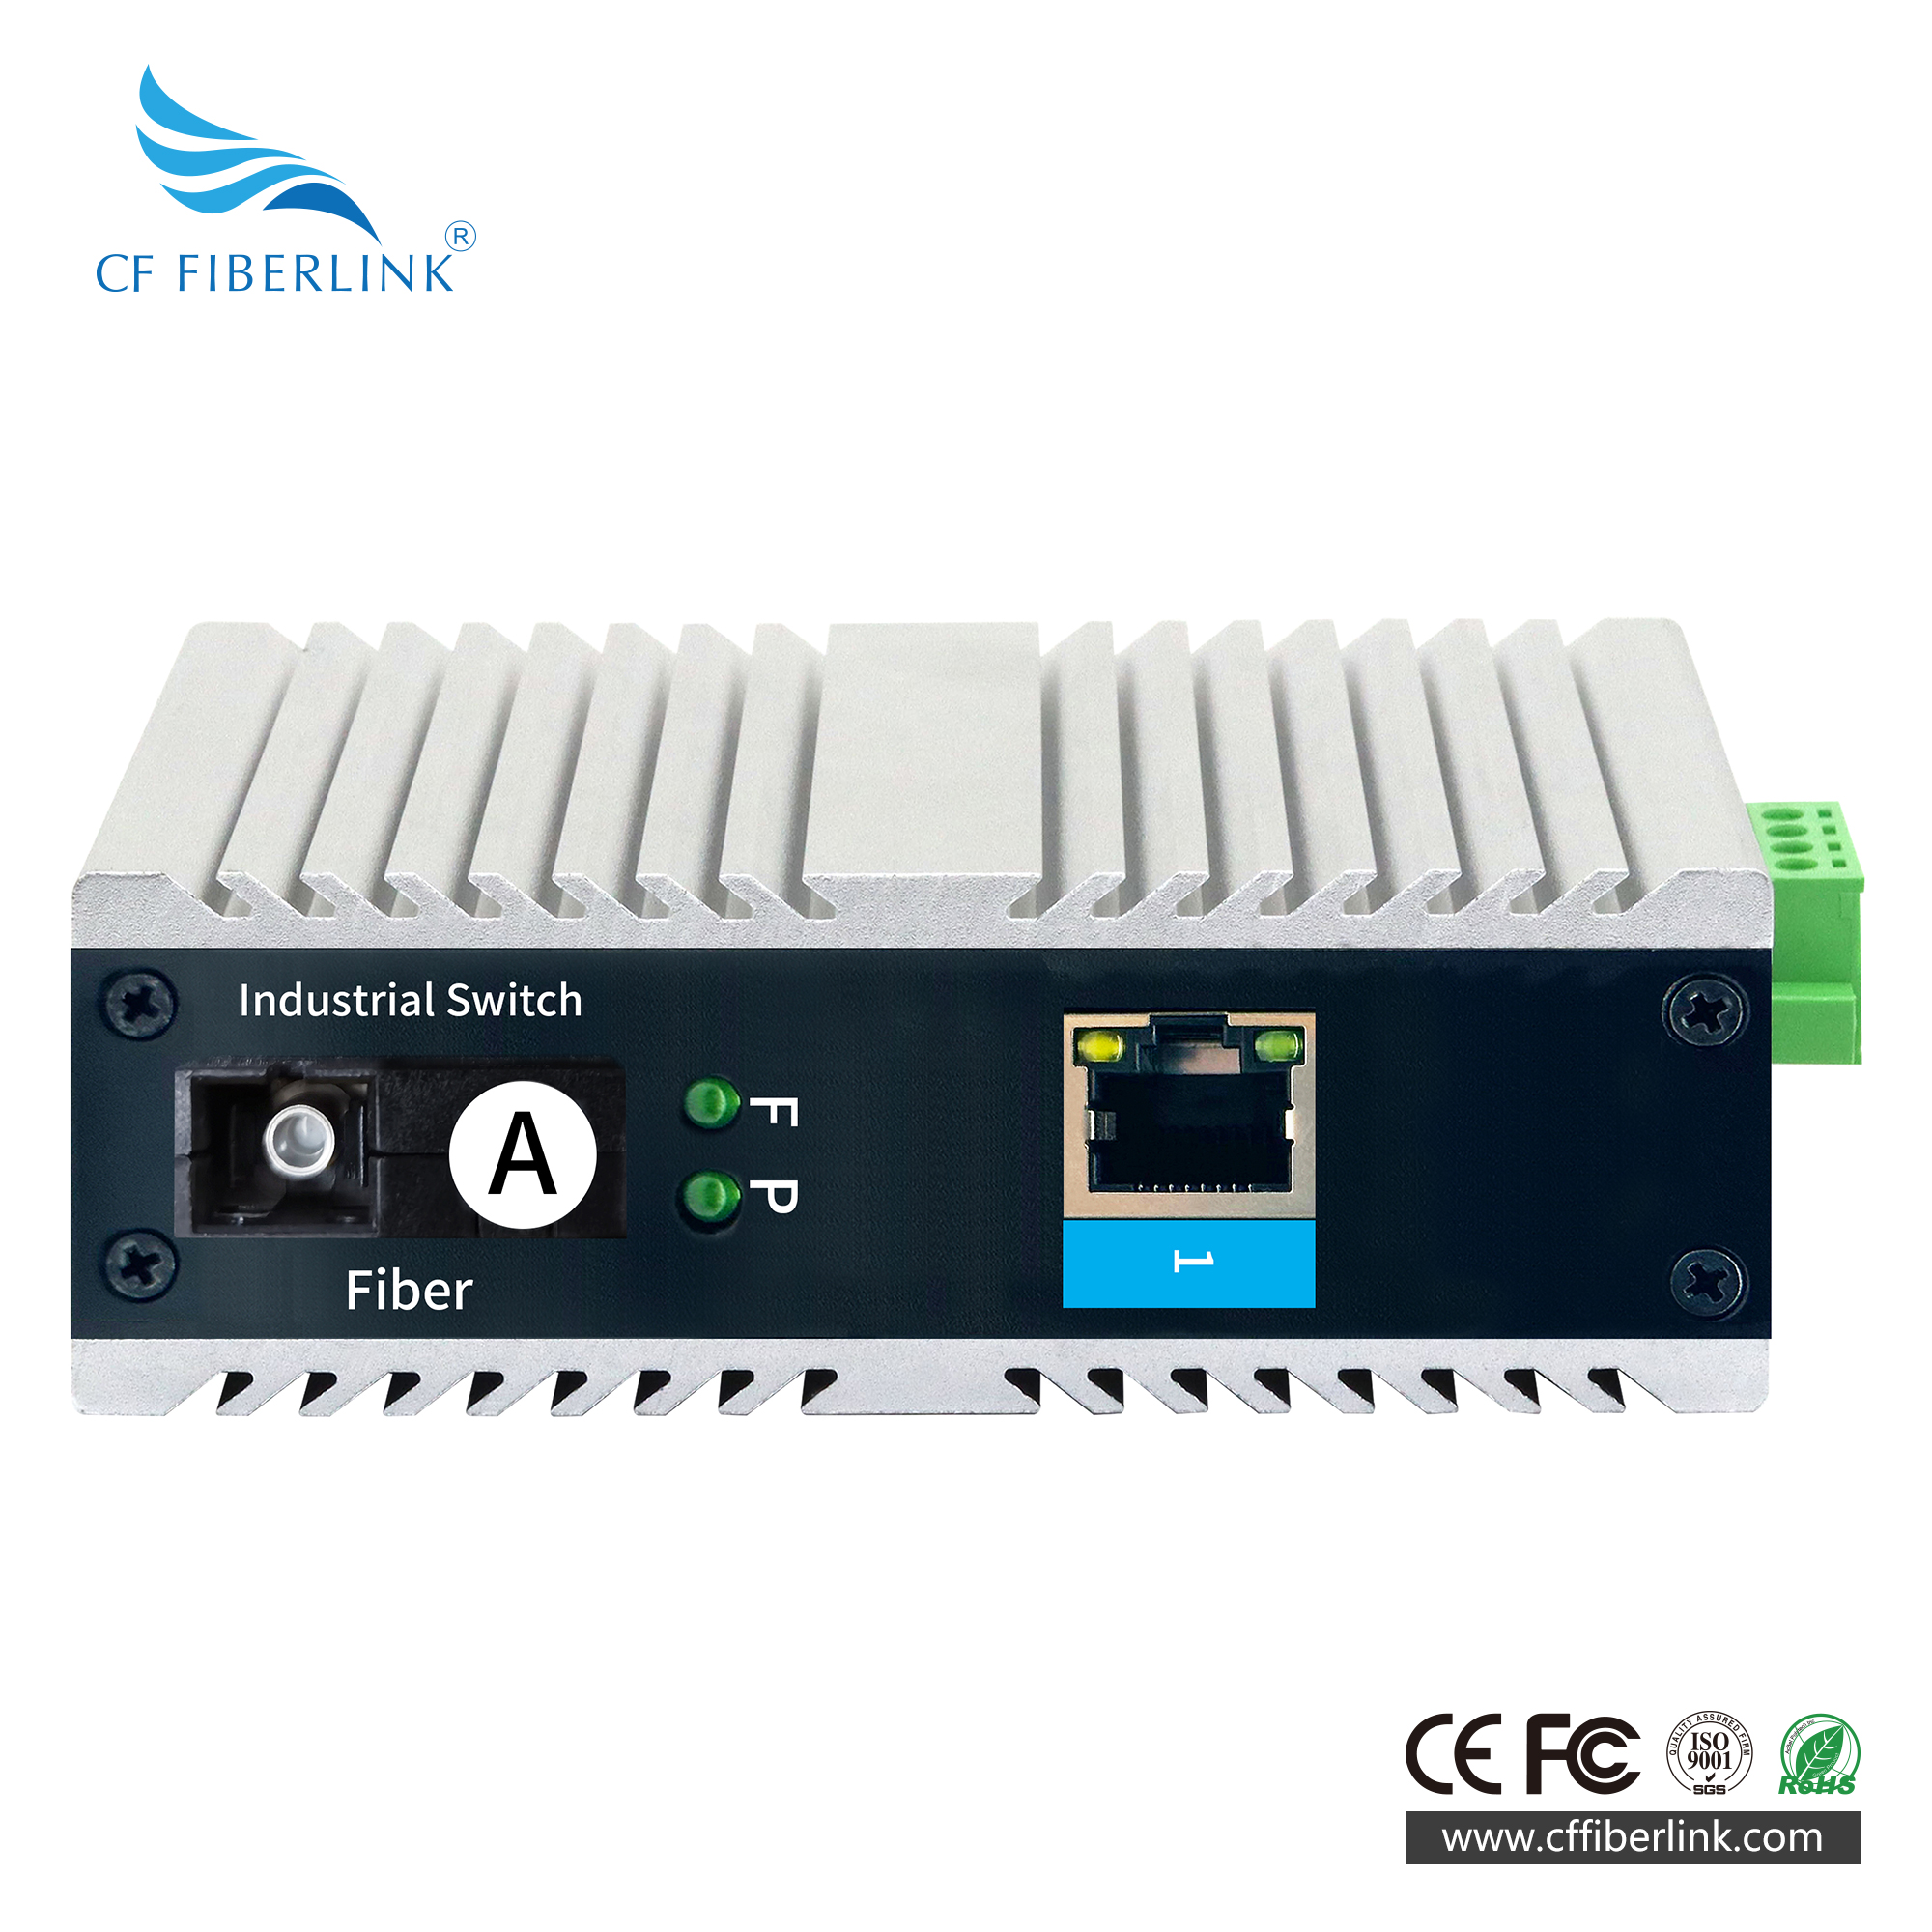 2-port 10/100/1000M Industrial Ethernet Switch